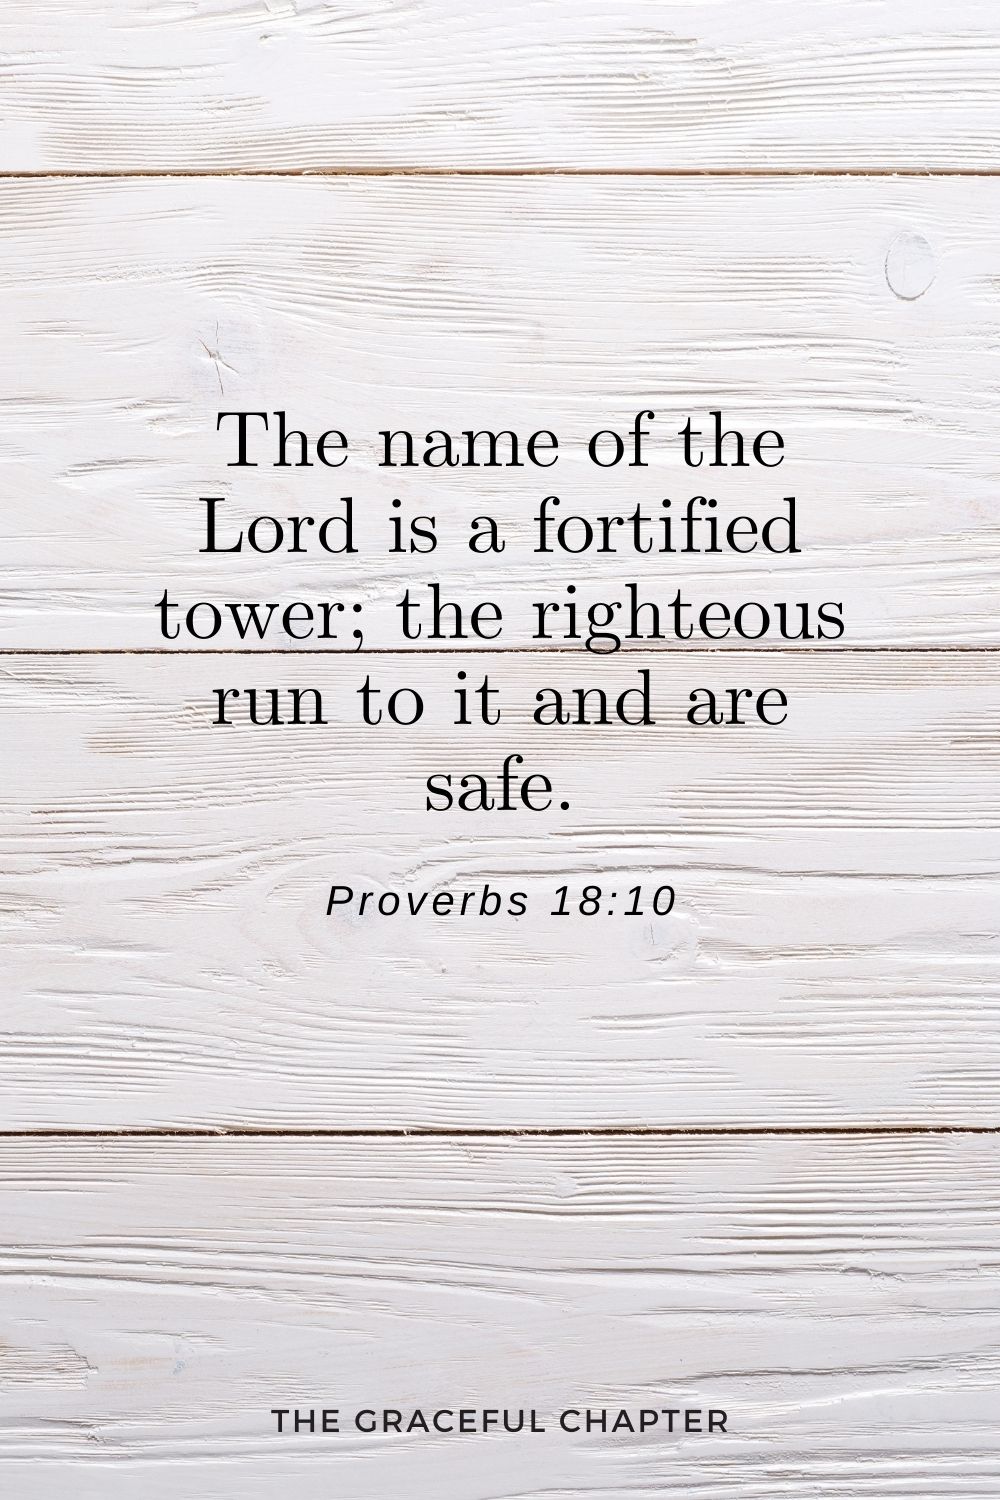 The name of the Lord is a fortified tower; the righteous run to it and are safe. Proverbs 18:10